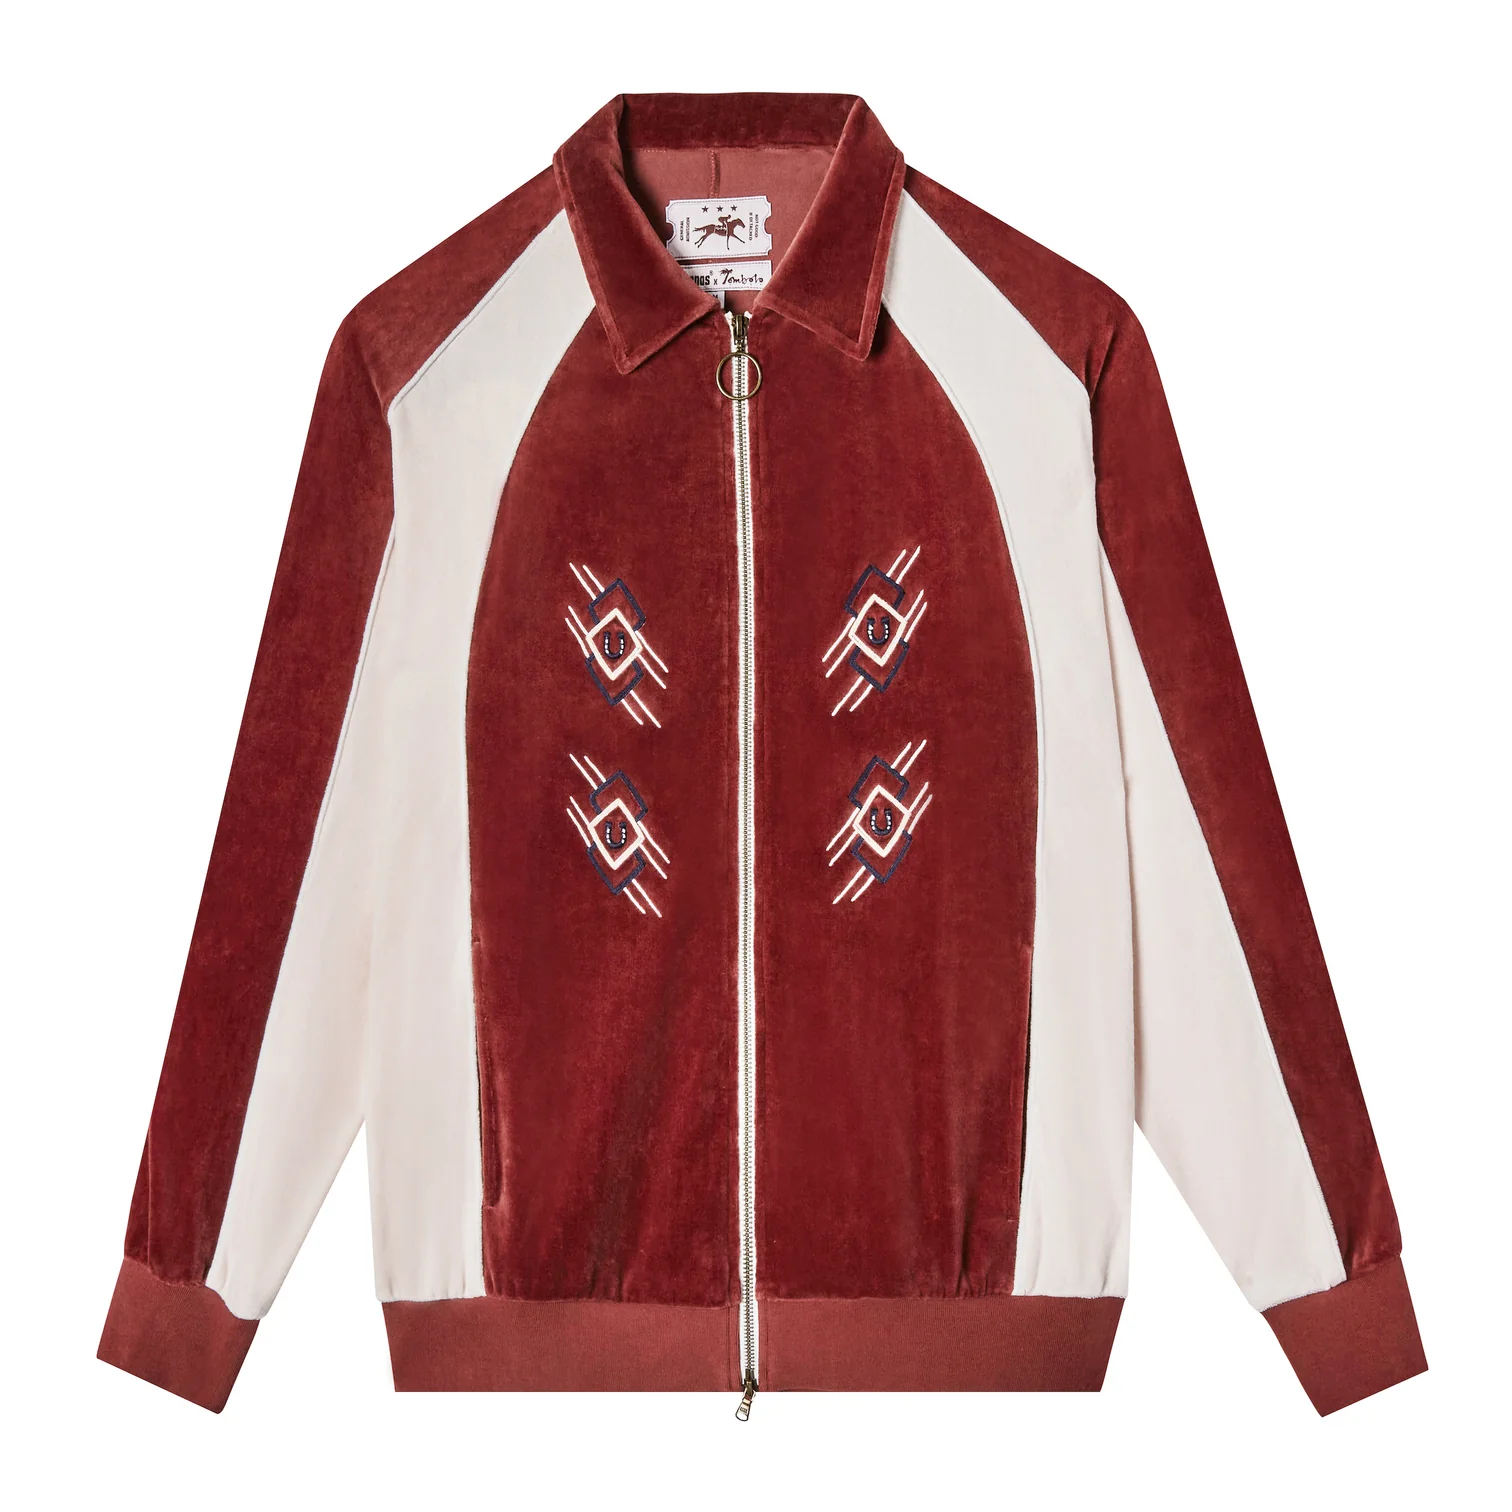 A vintage-style jacket with a zip-up front, featuring a red velvet body with light-colored panels and geometric embroidery on the chest